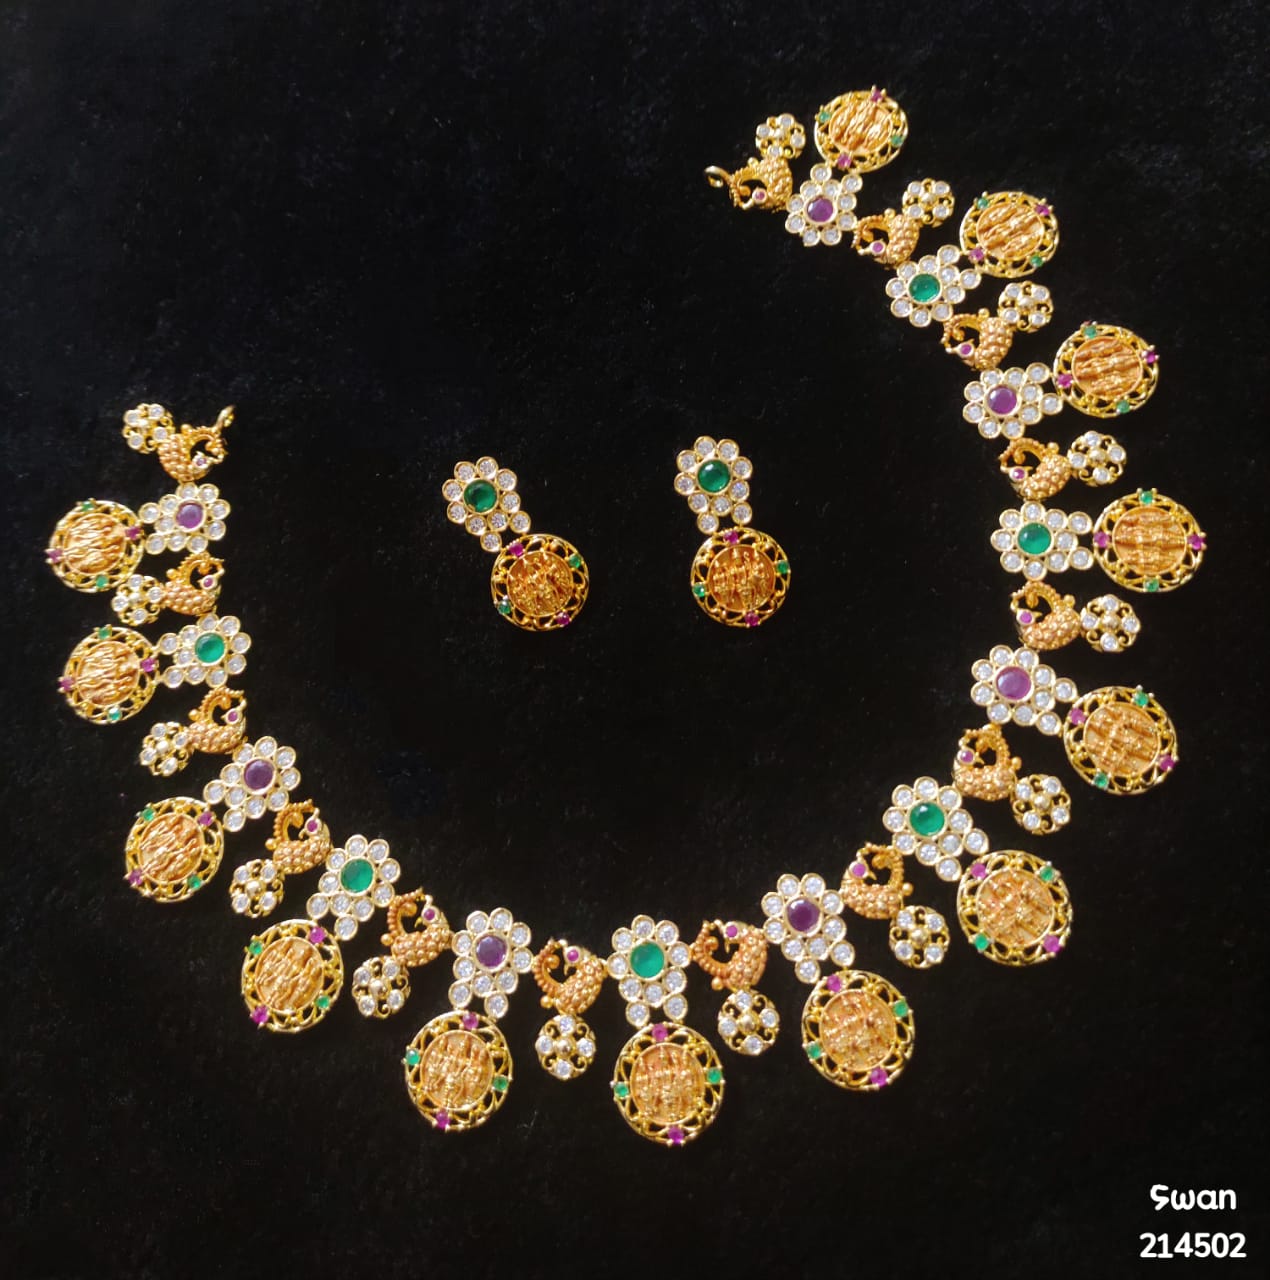 New Jewelry July 2020 Collection - Indian Jewelry Designs